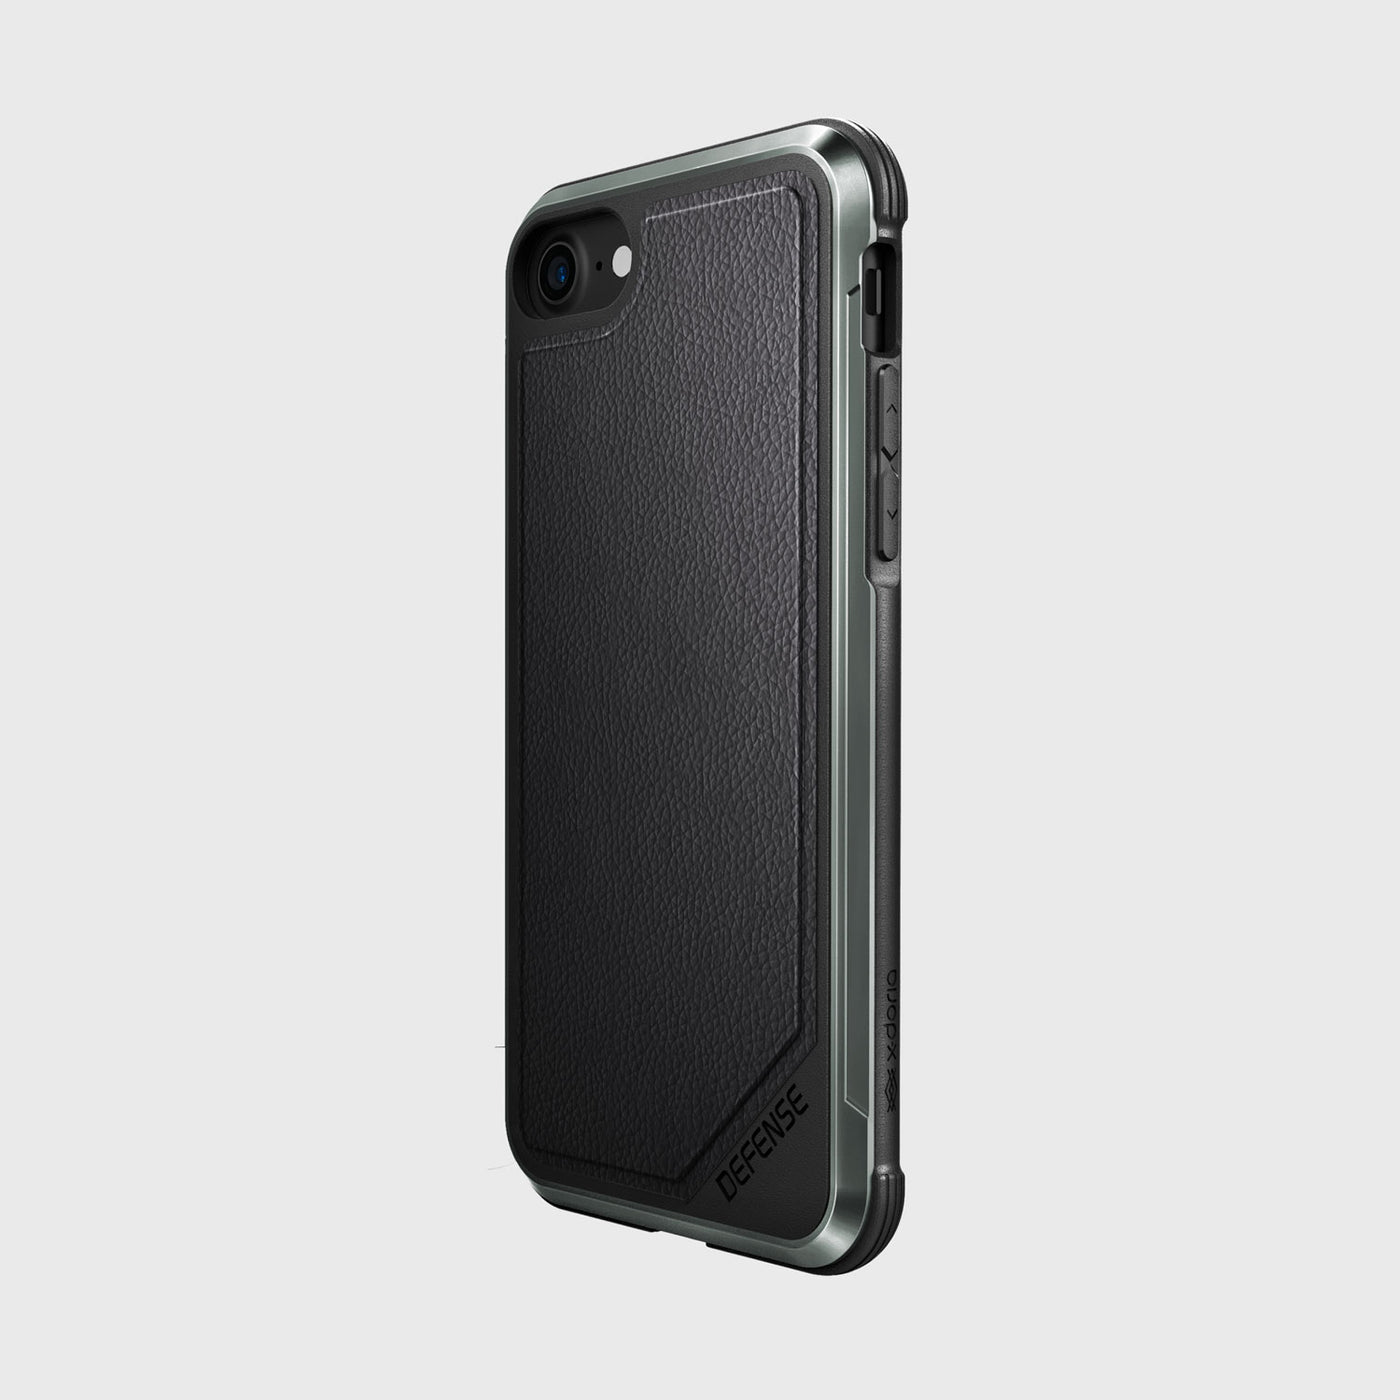 Luxurious Case for iPhone 8. Raptic Lux in black leather.